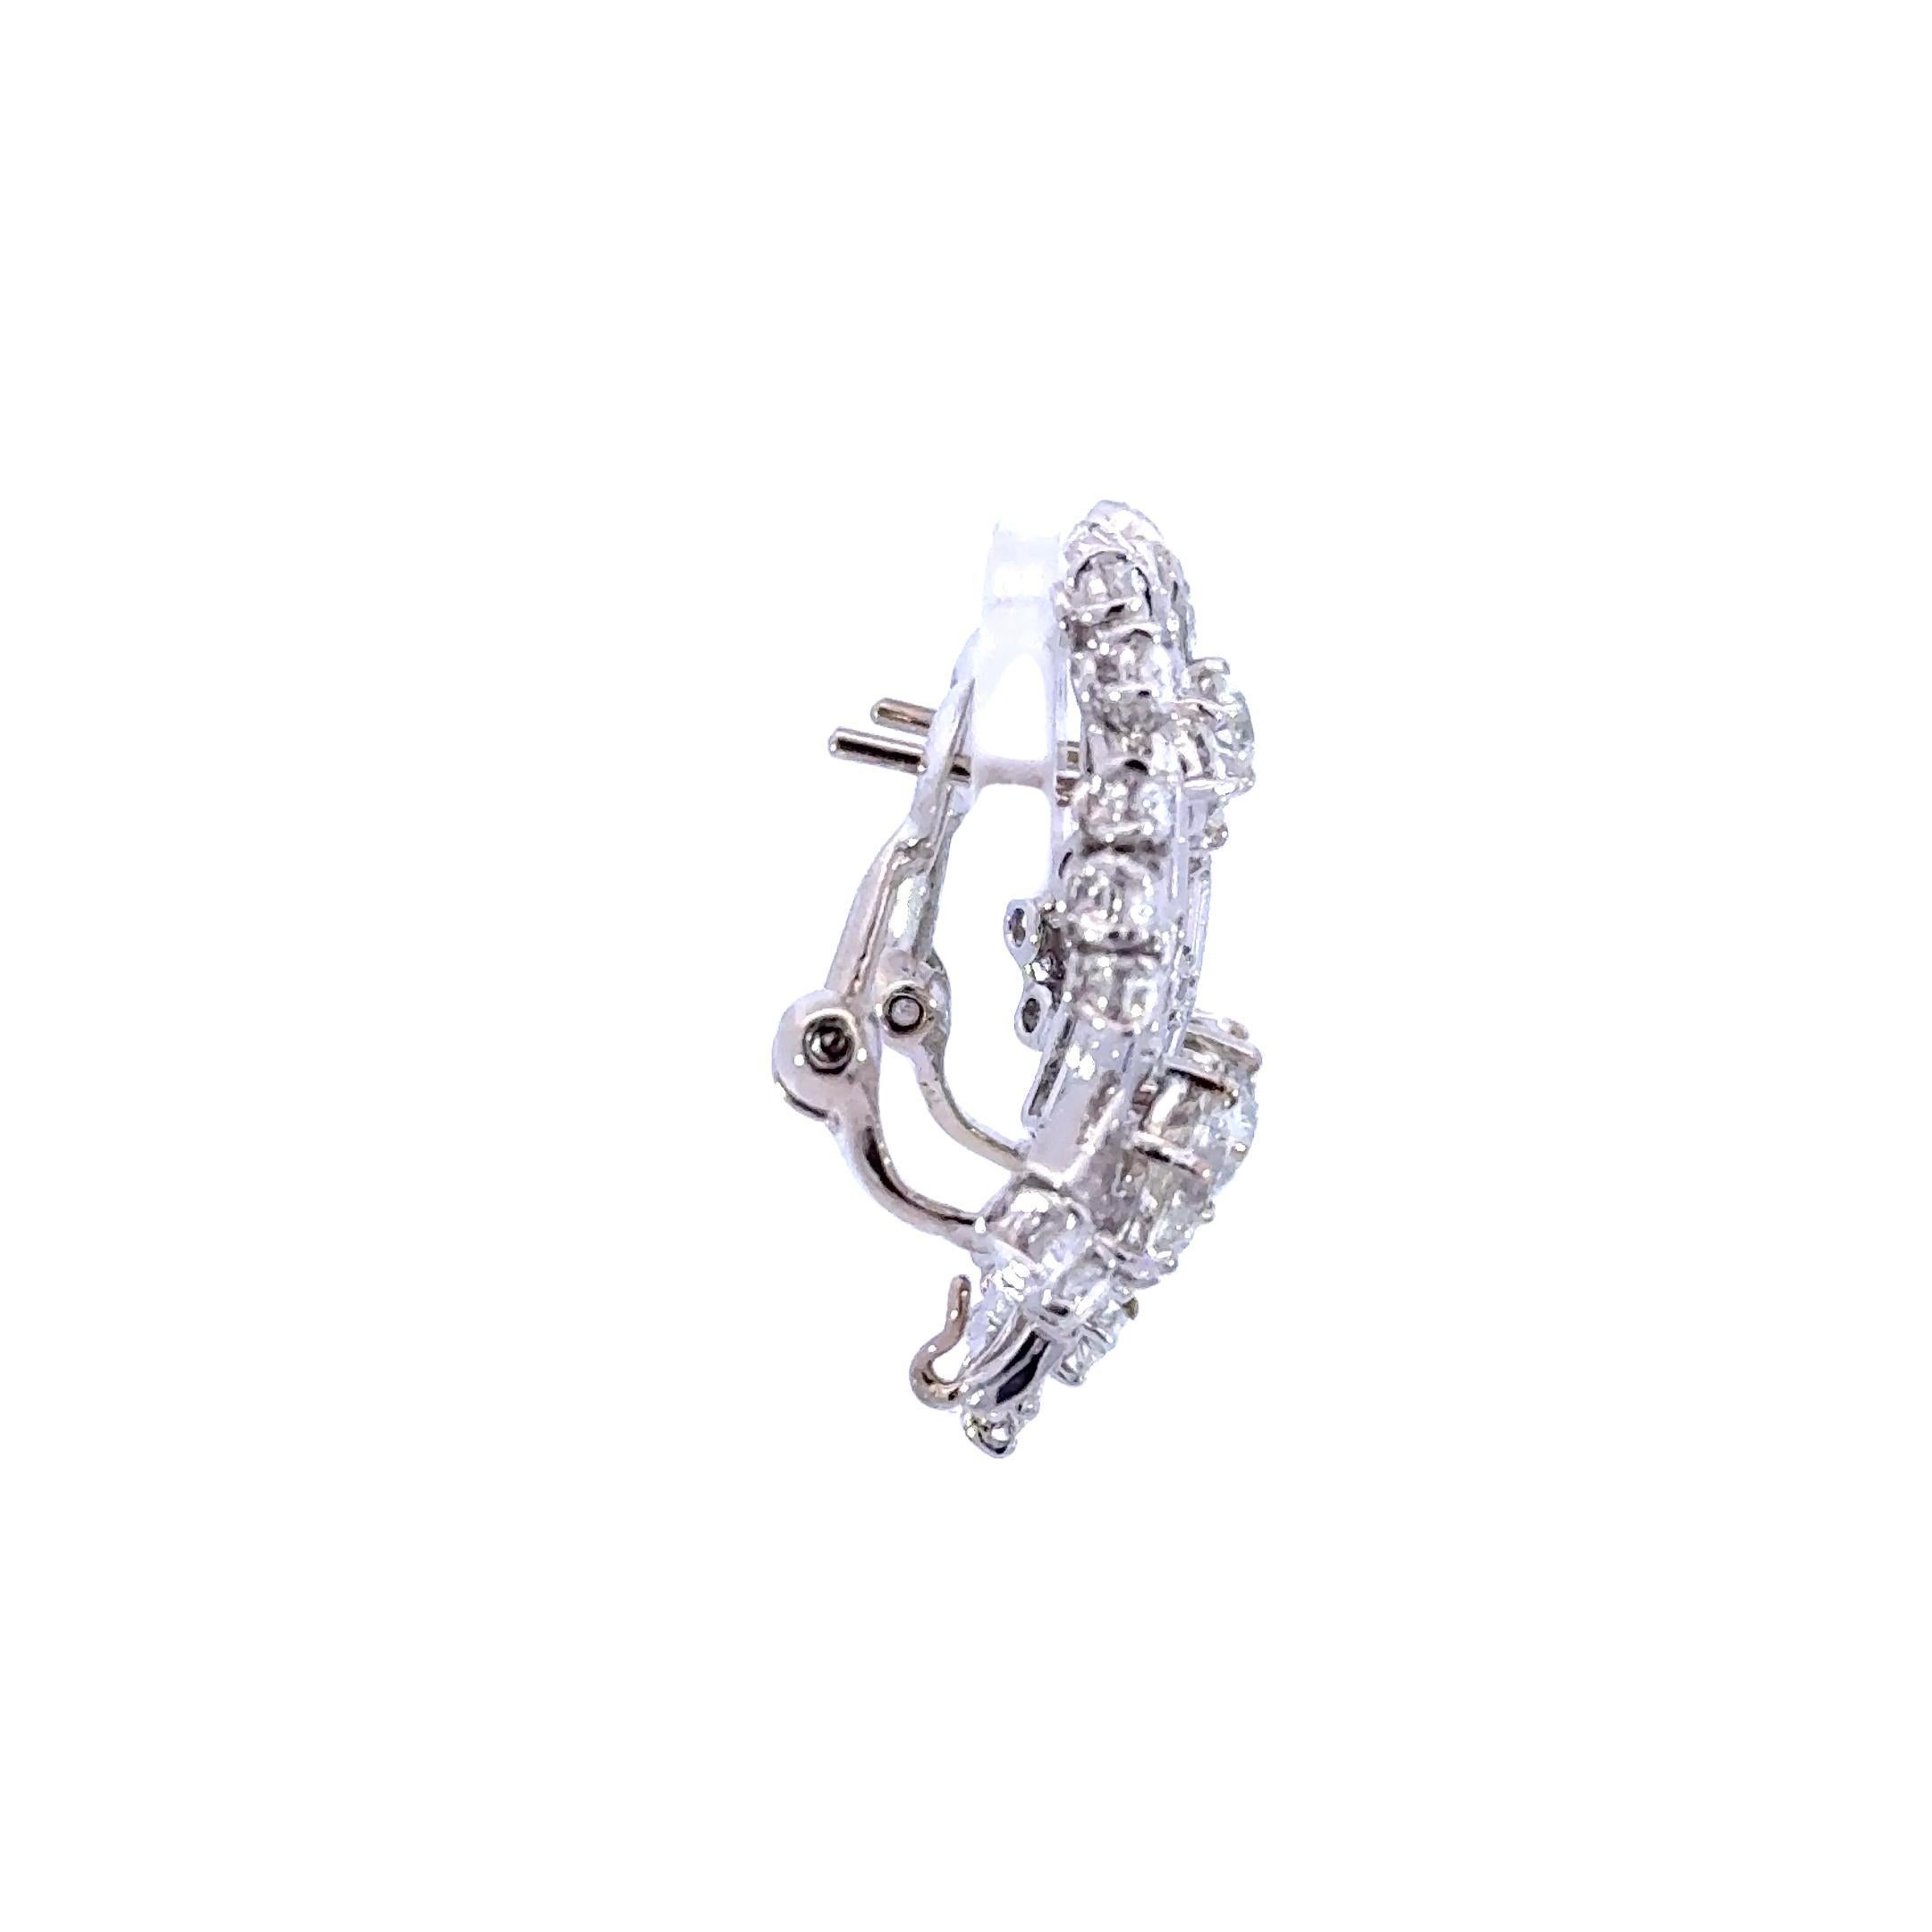 The 5.00 Carat Diamond Old European Cut Drop Earring is an exquisite piece of jewelry that exudes elegance and sophistication. Crafted with precision and attention to detail, these drop earrings feature a stunning 2.00-carat diamond at the center of